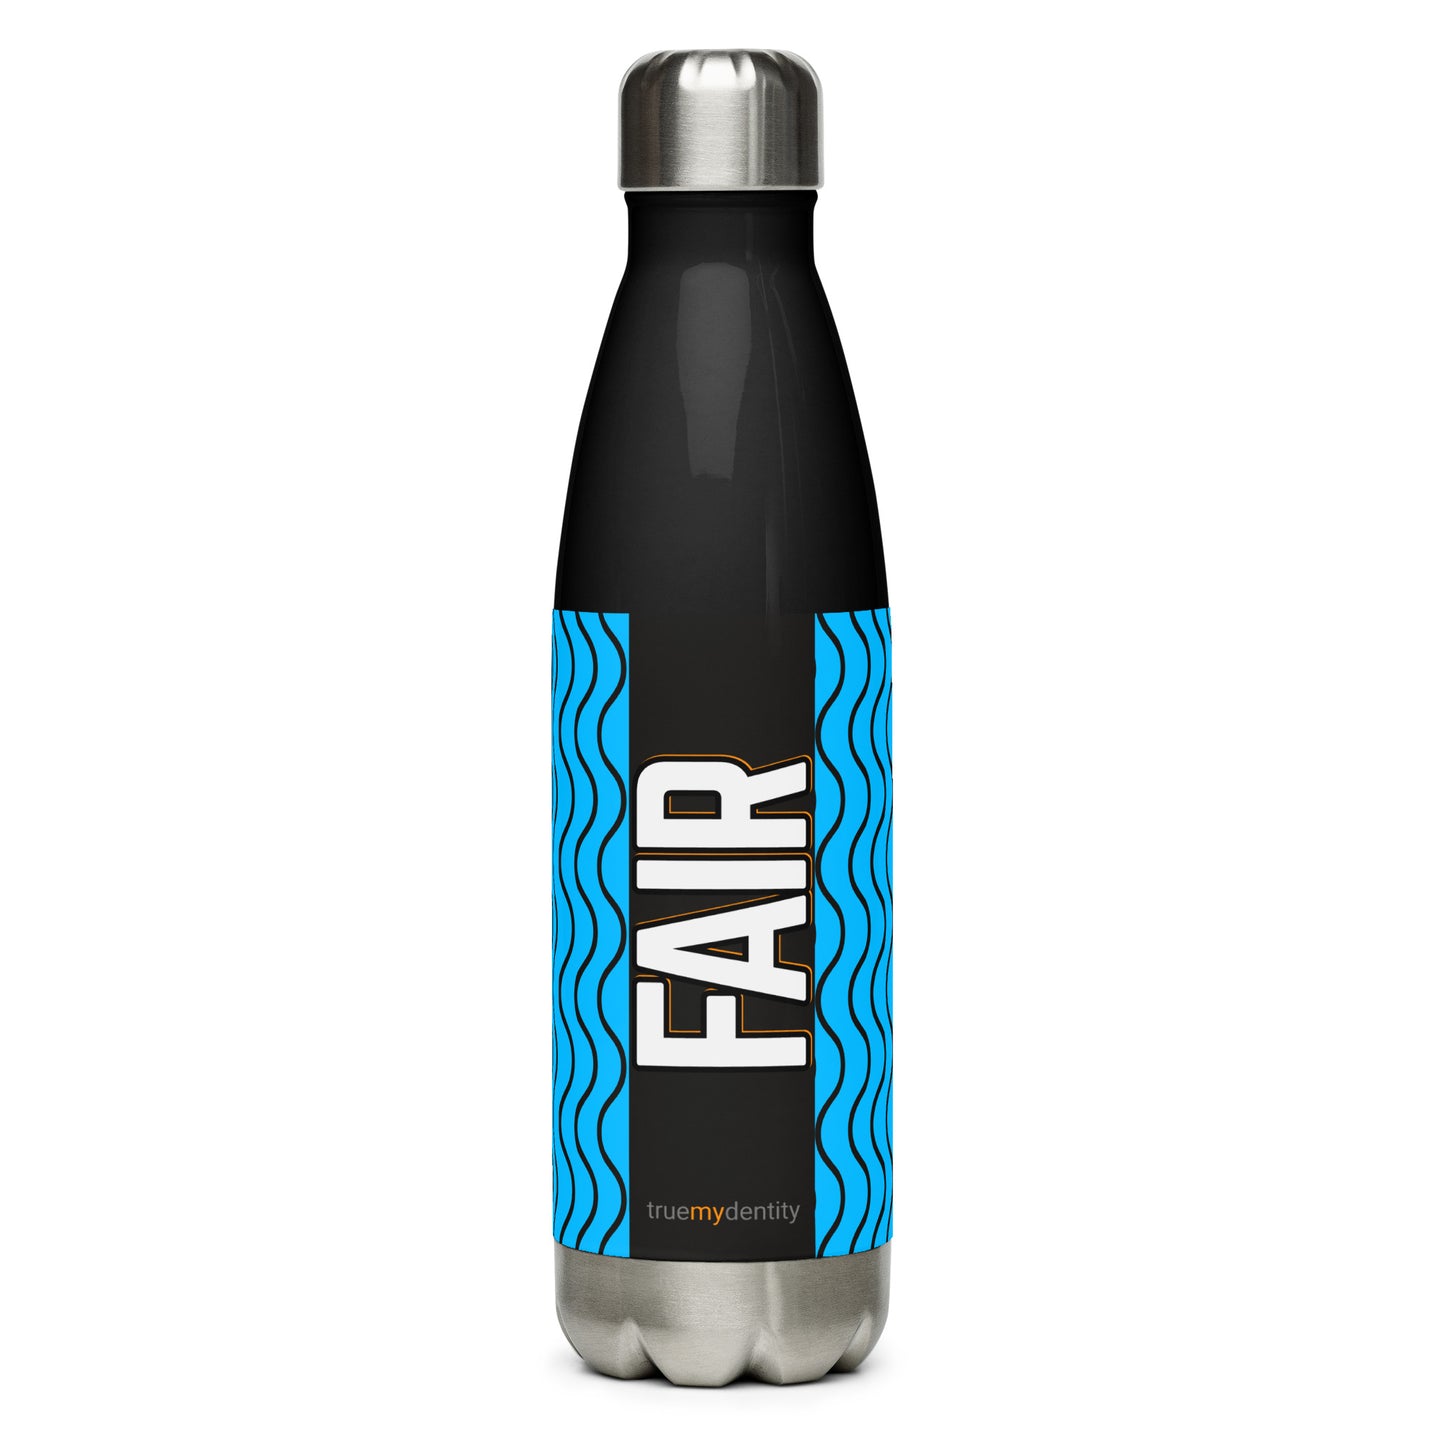 FAIR Stainless Steel Water Bottle Blue Wave Design, 17 oz, in Black or White